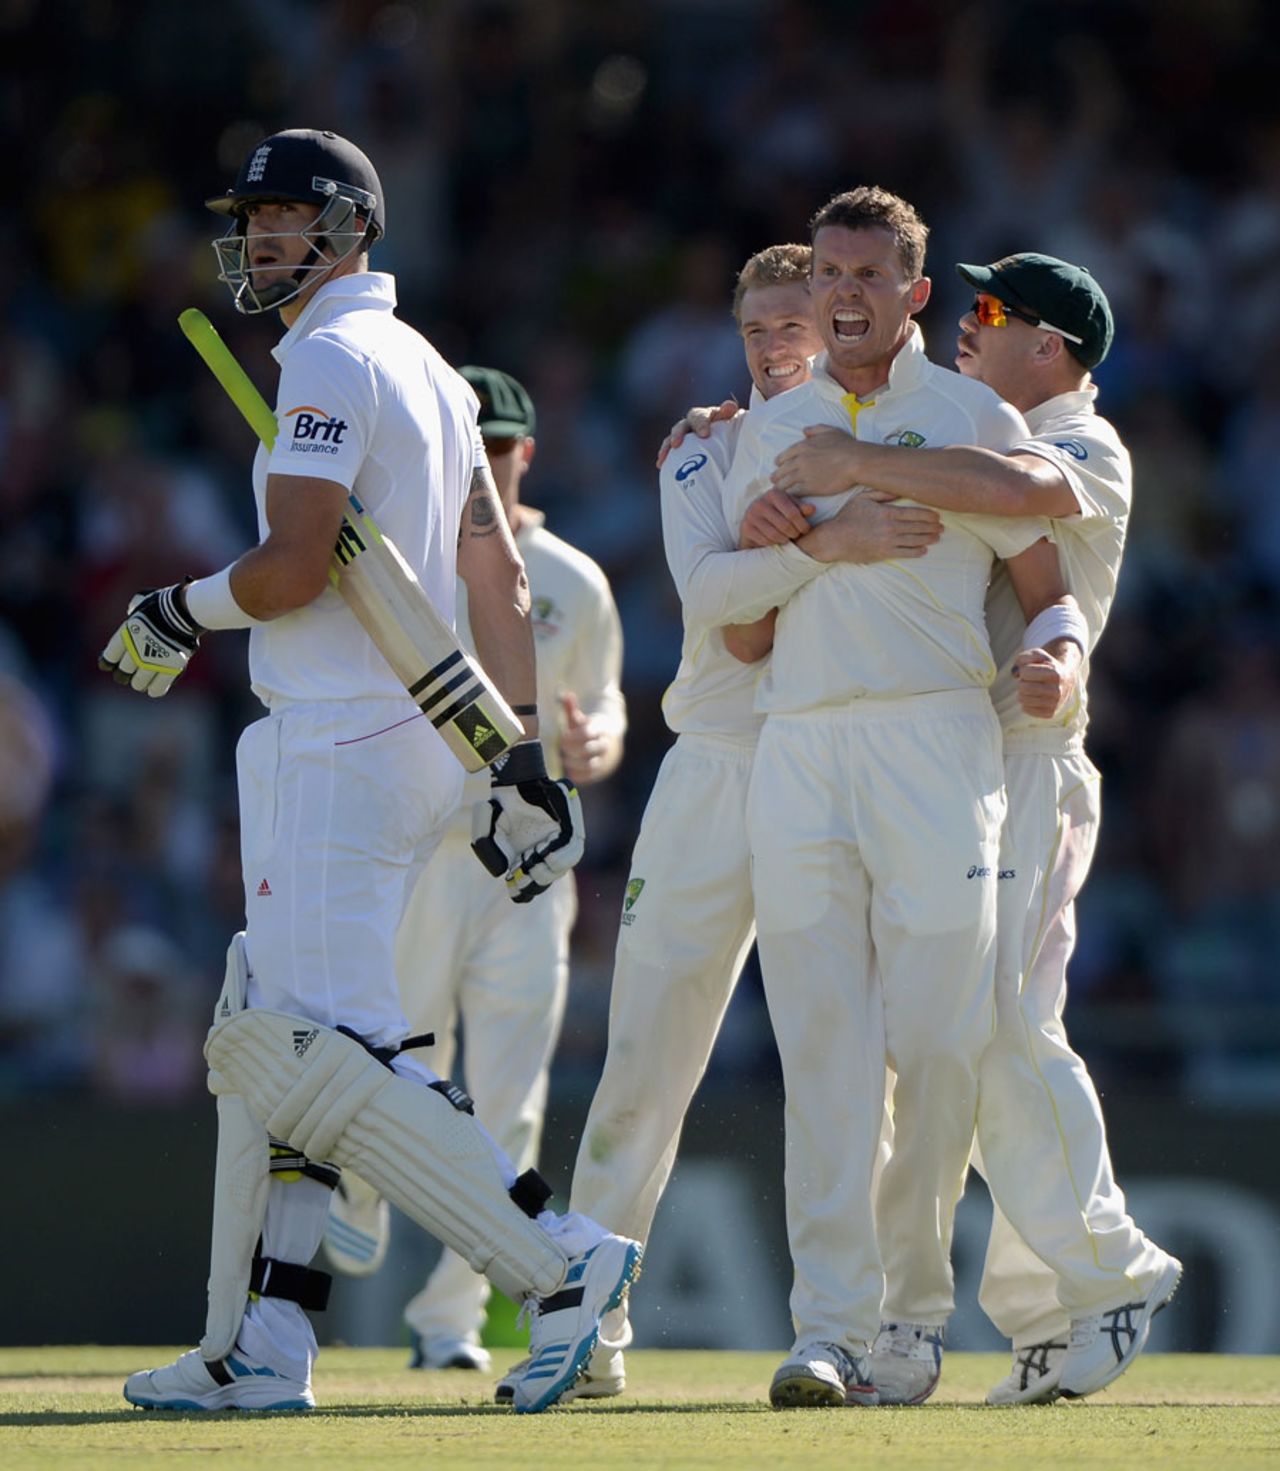 Peter Siddle was highly animated after dismissing Kevin Pietersen, Australia v England, 3rd Test, Perth, 2nd day, December 14, 2013